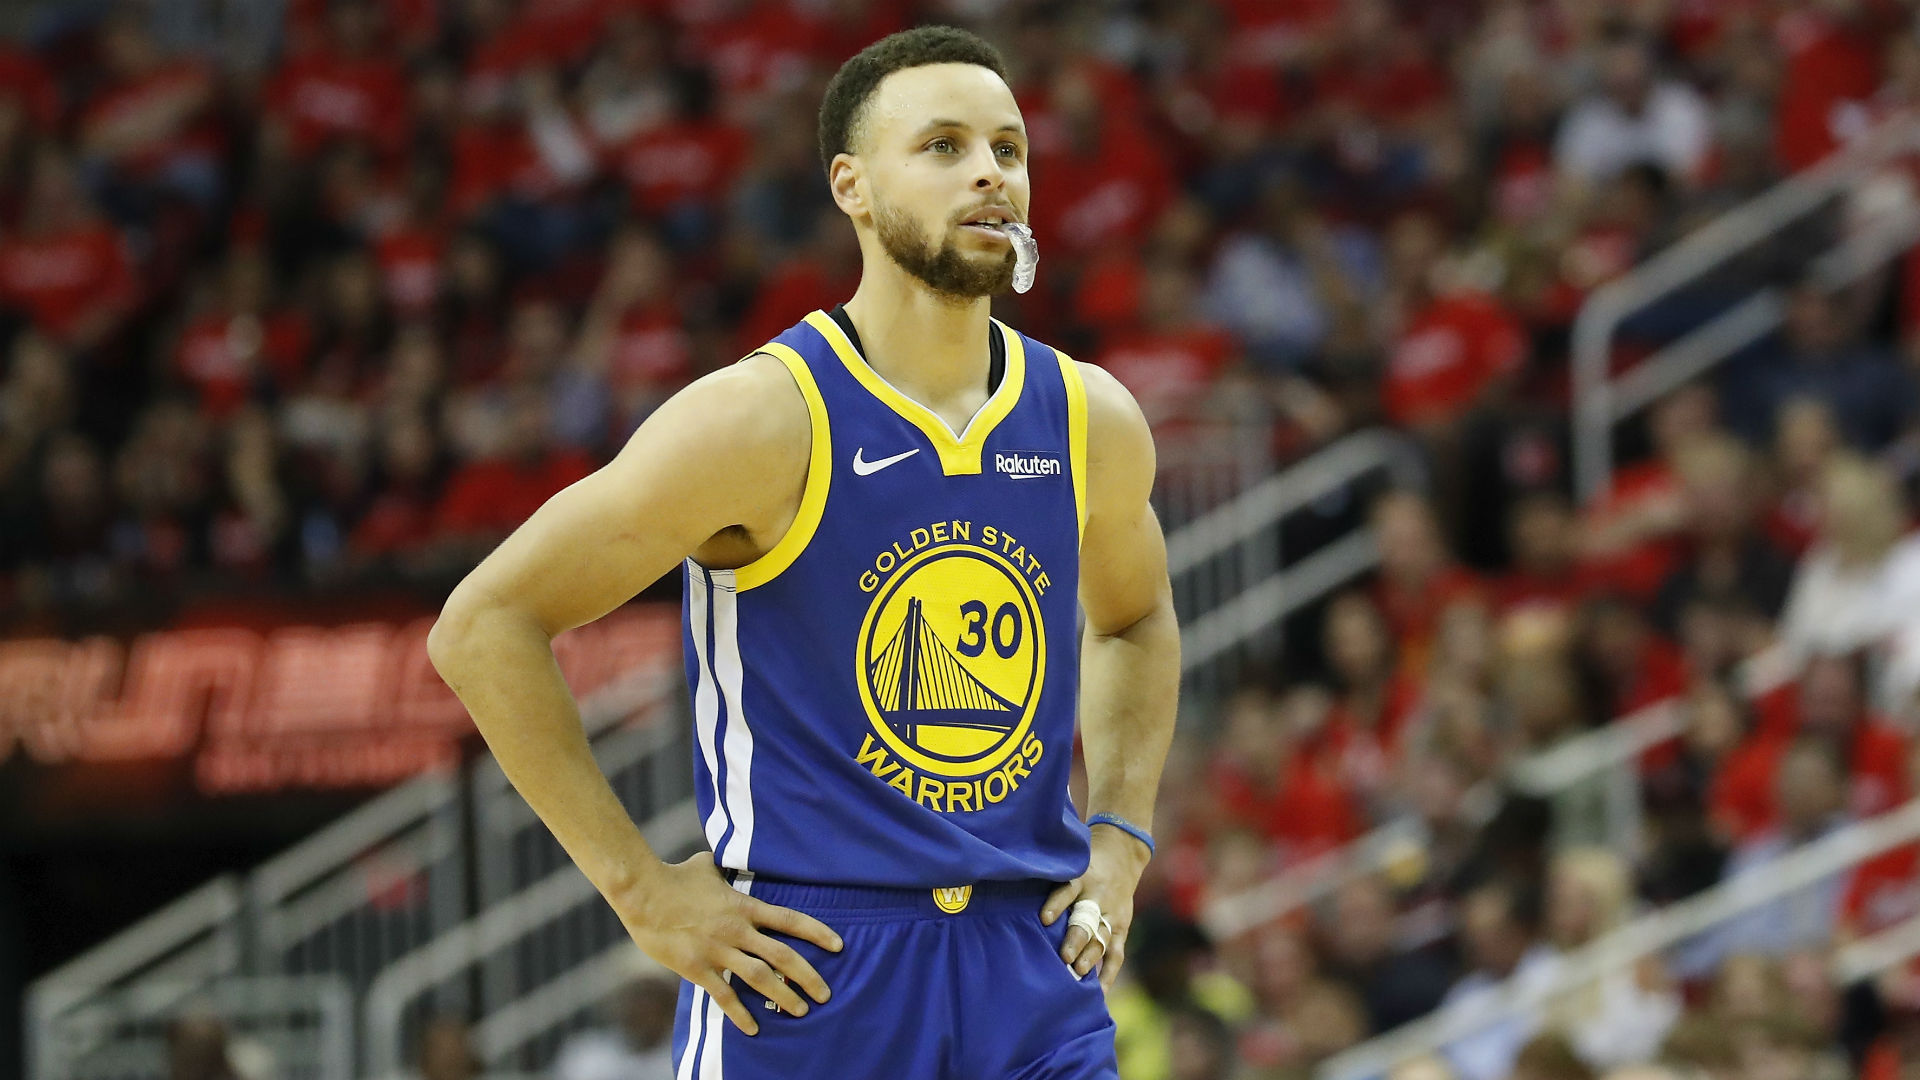 Image result for stephen curry